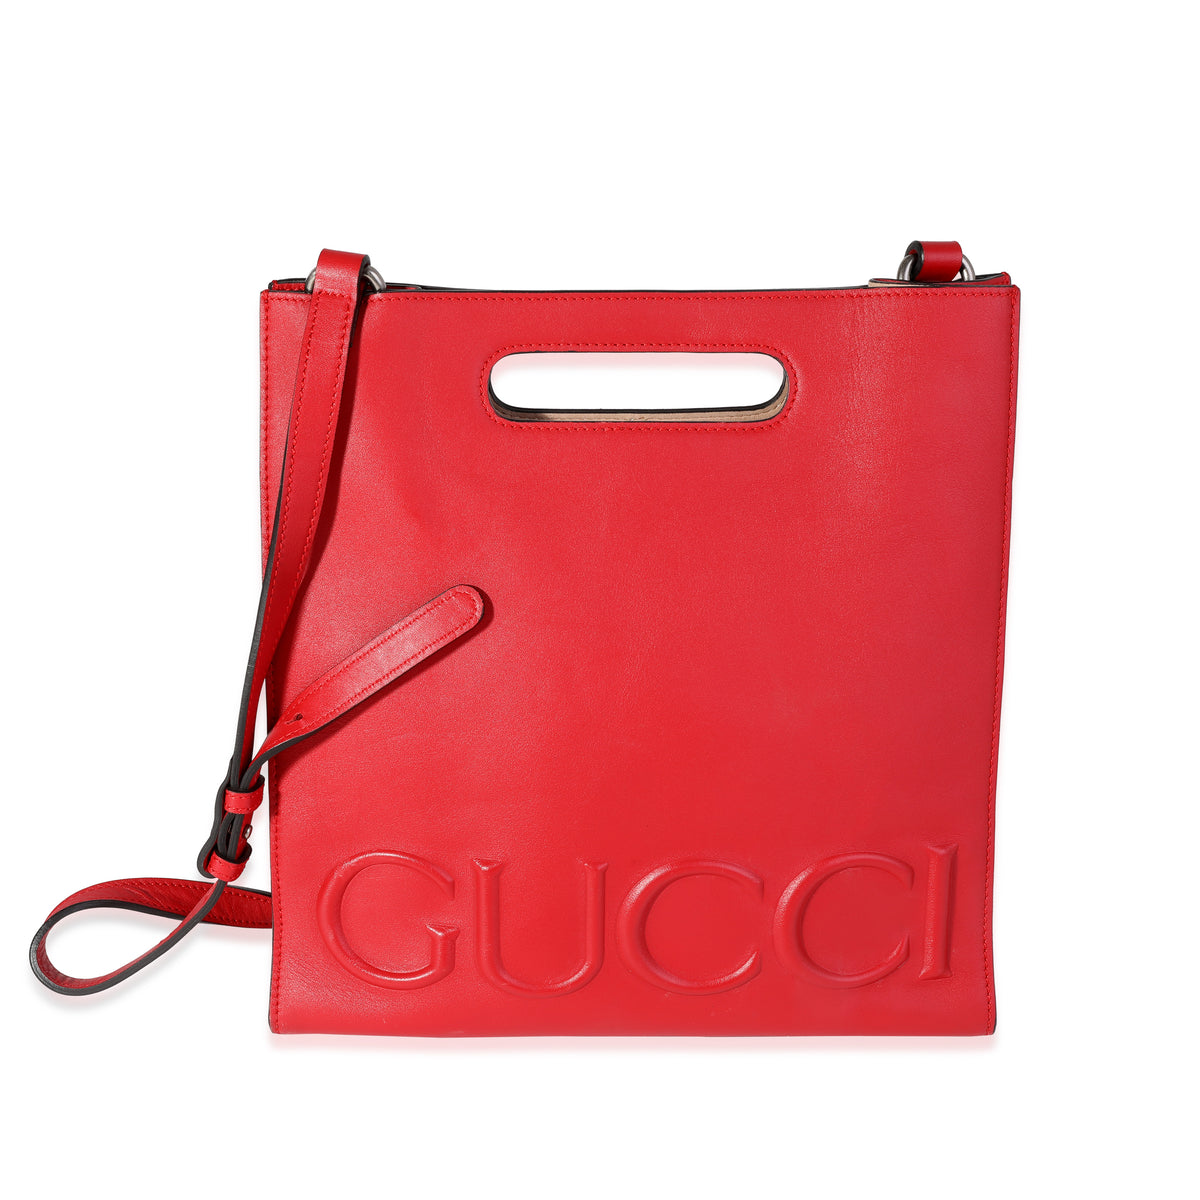 Gucci Red Leather Embossed Logo Tote